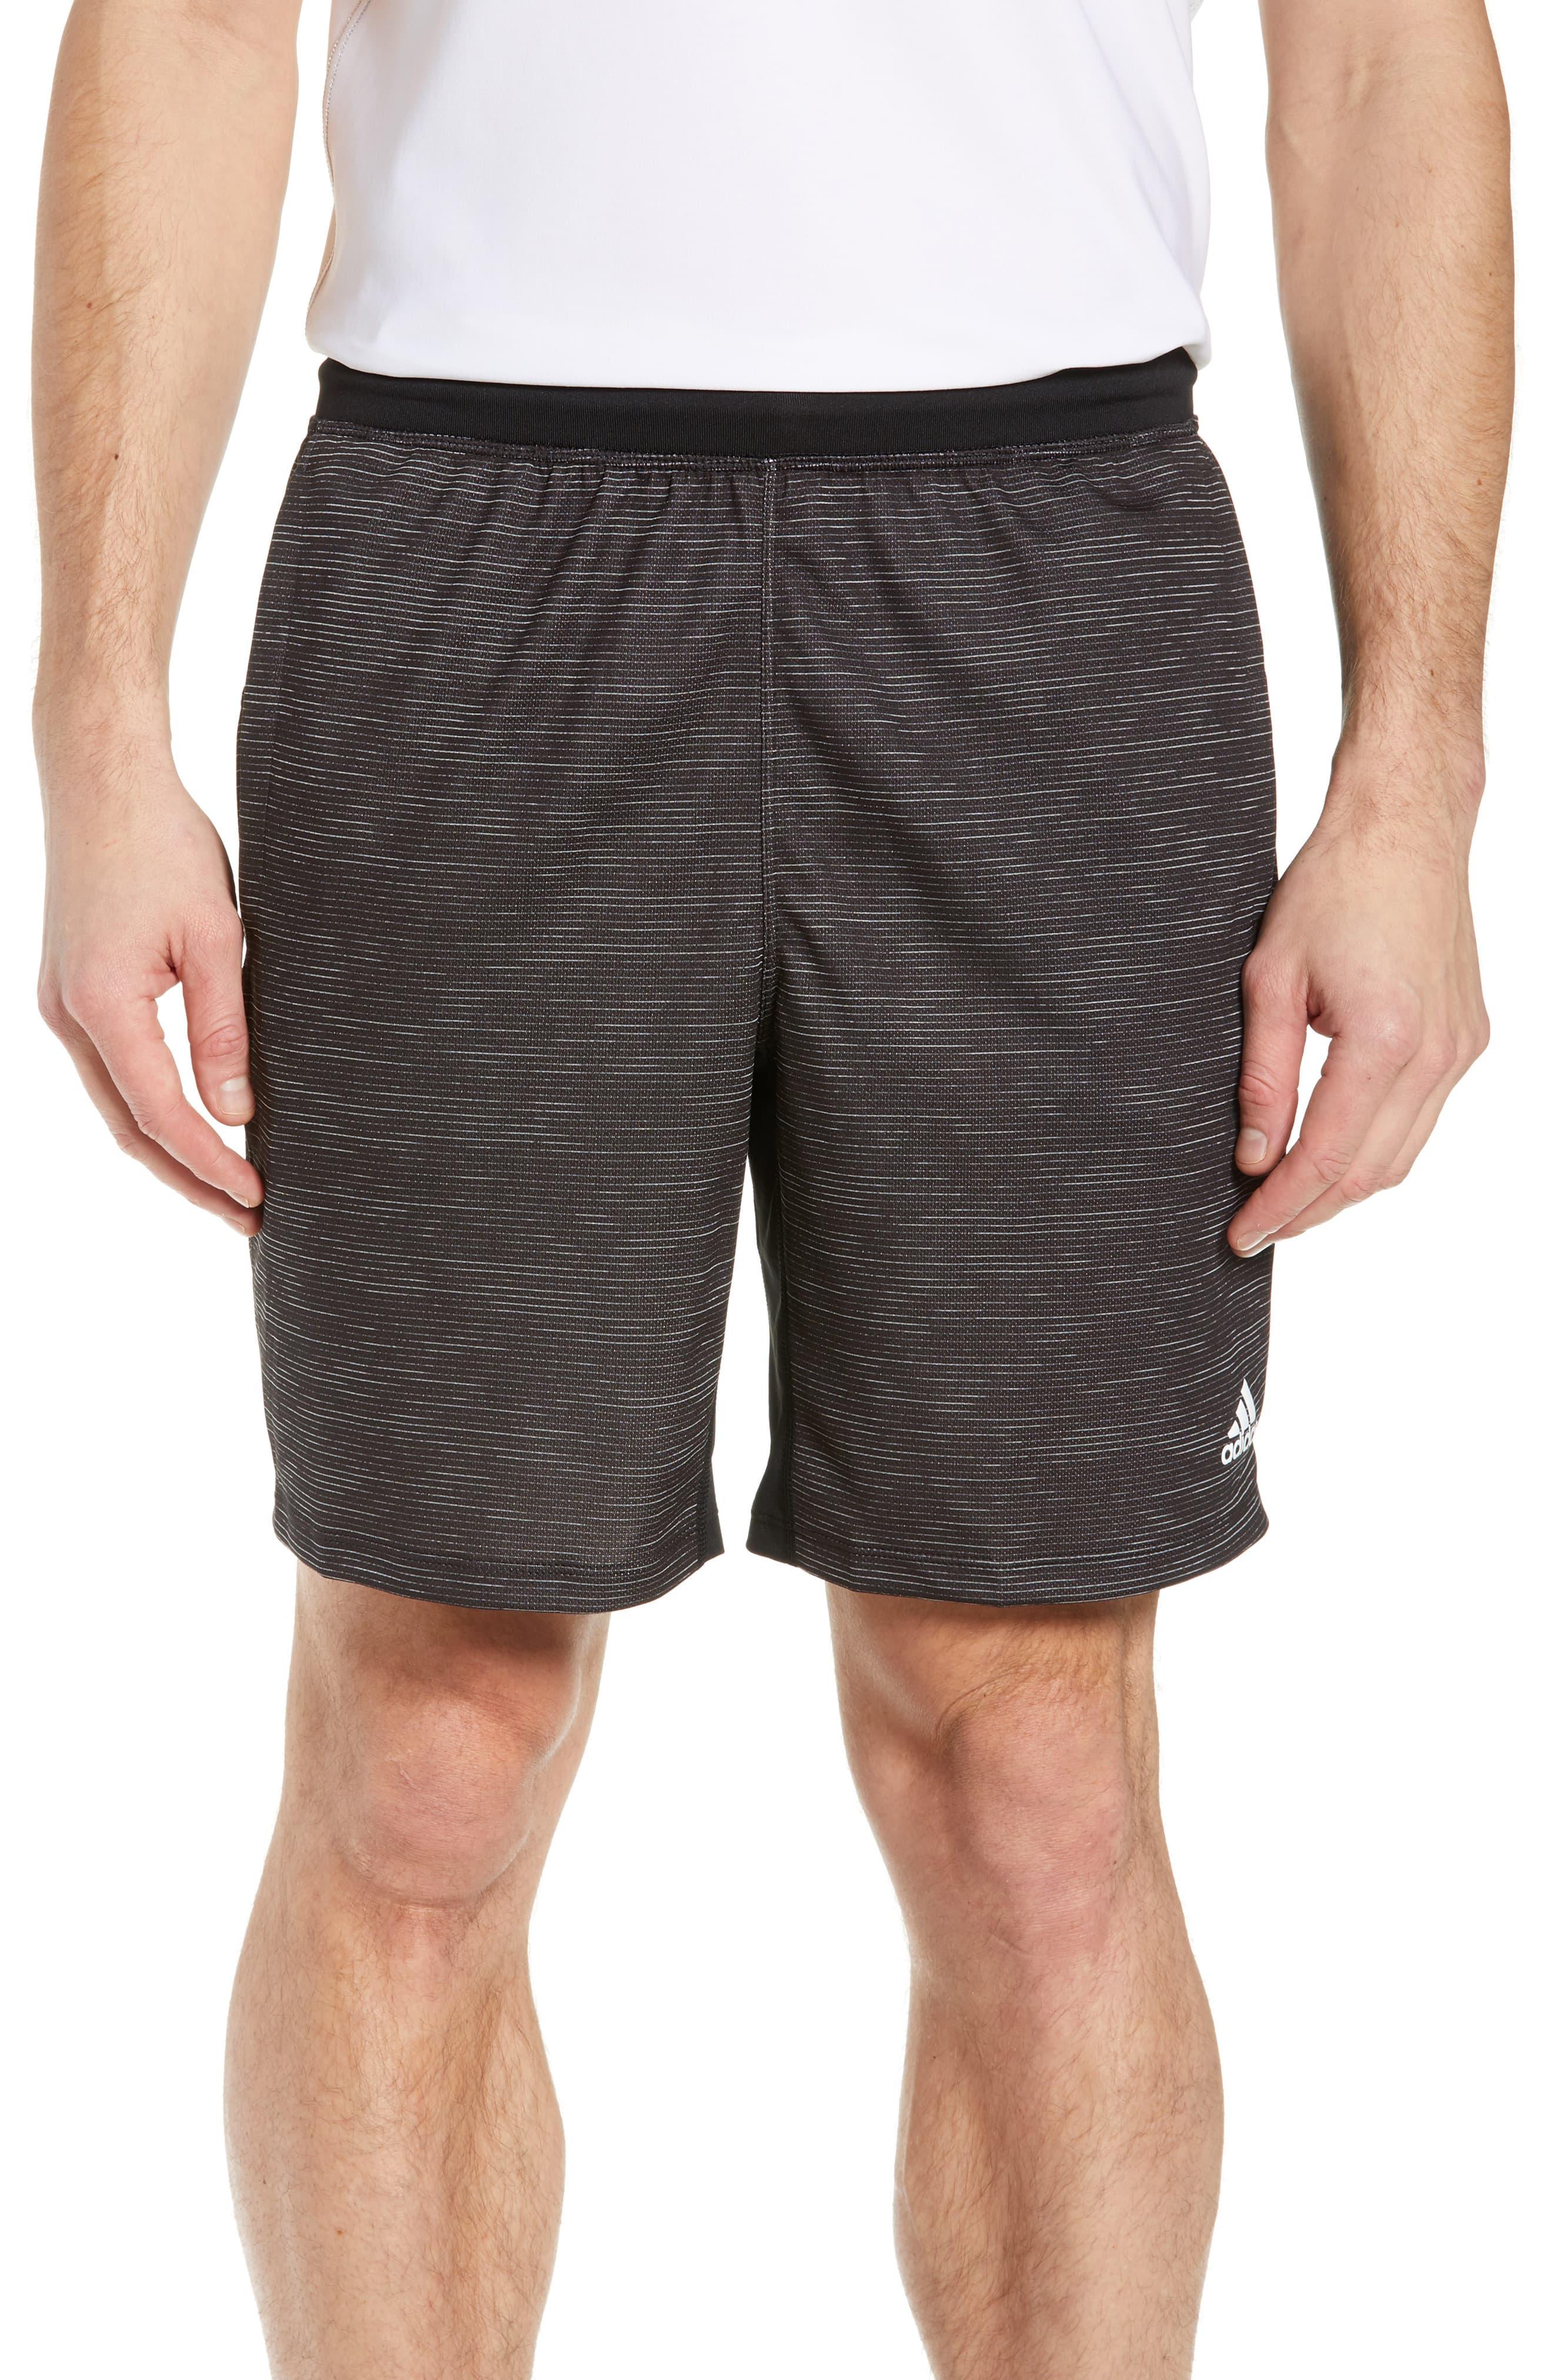 adidas Knit Shorts in Black for Men - Lyst